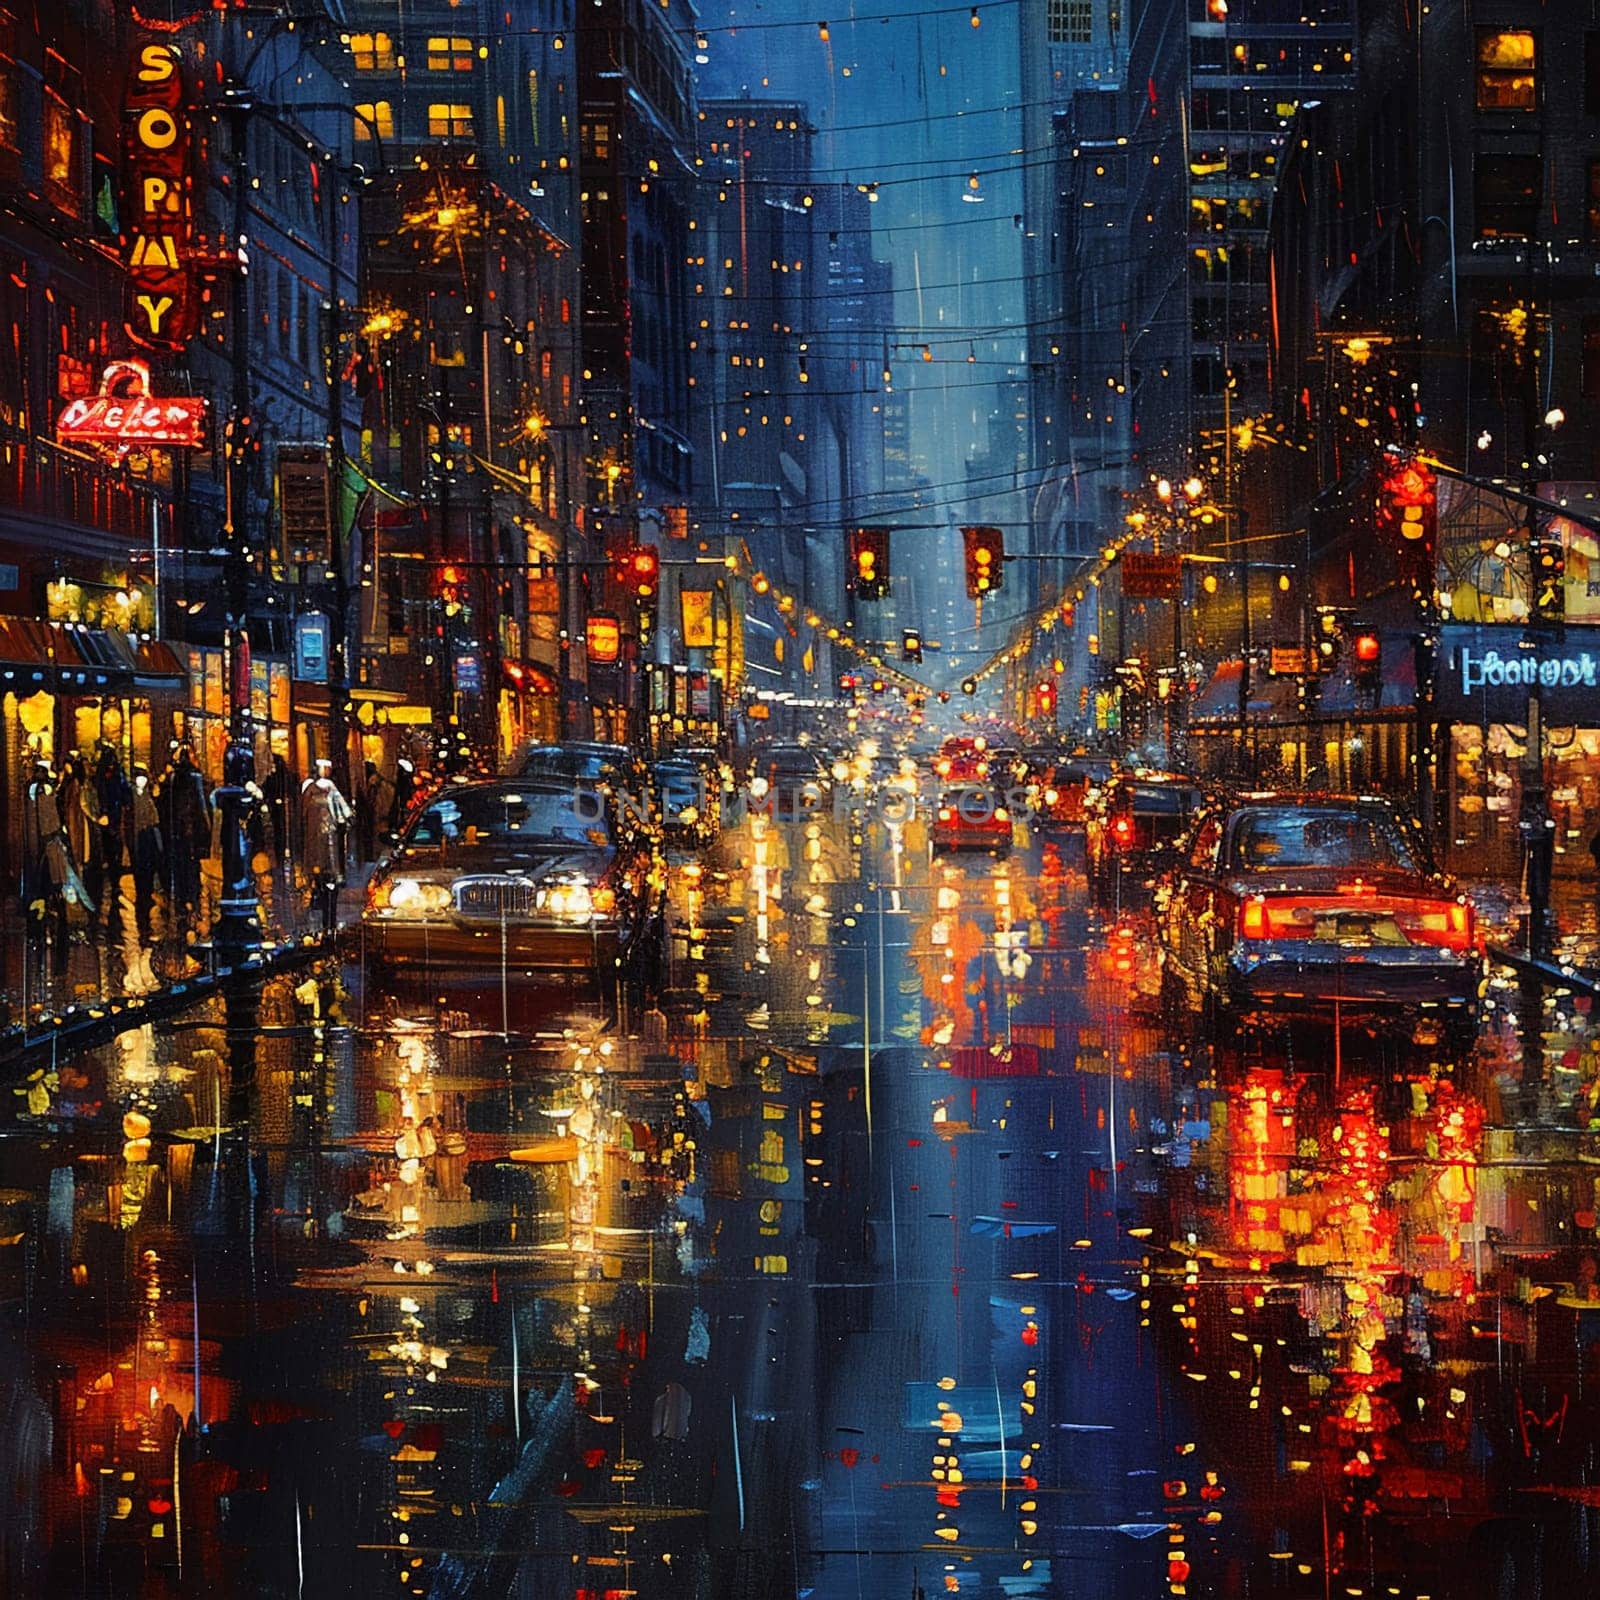 Rain-slicked urban street captured in glossy oil paints, highlighting reflective surfaces and city lights.